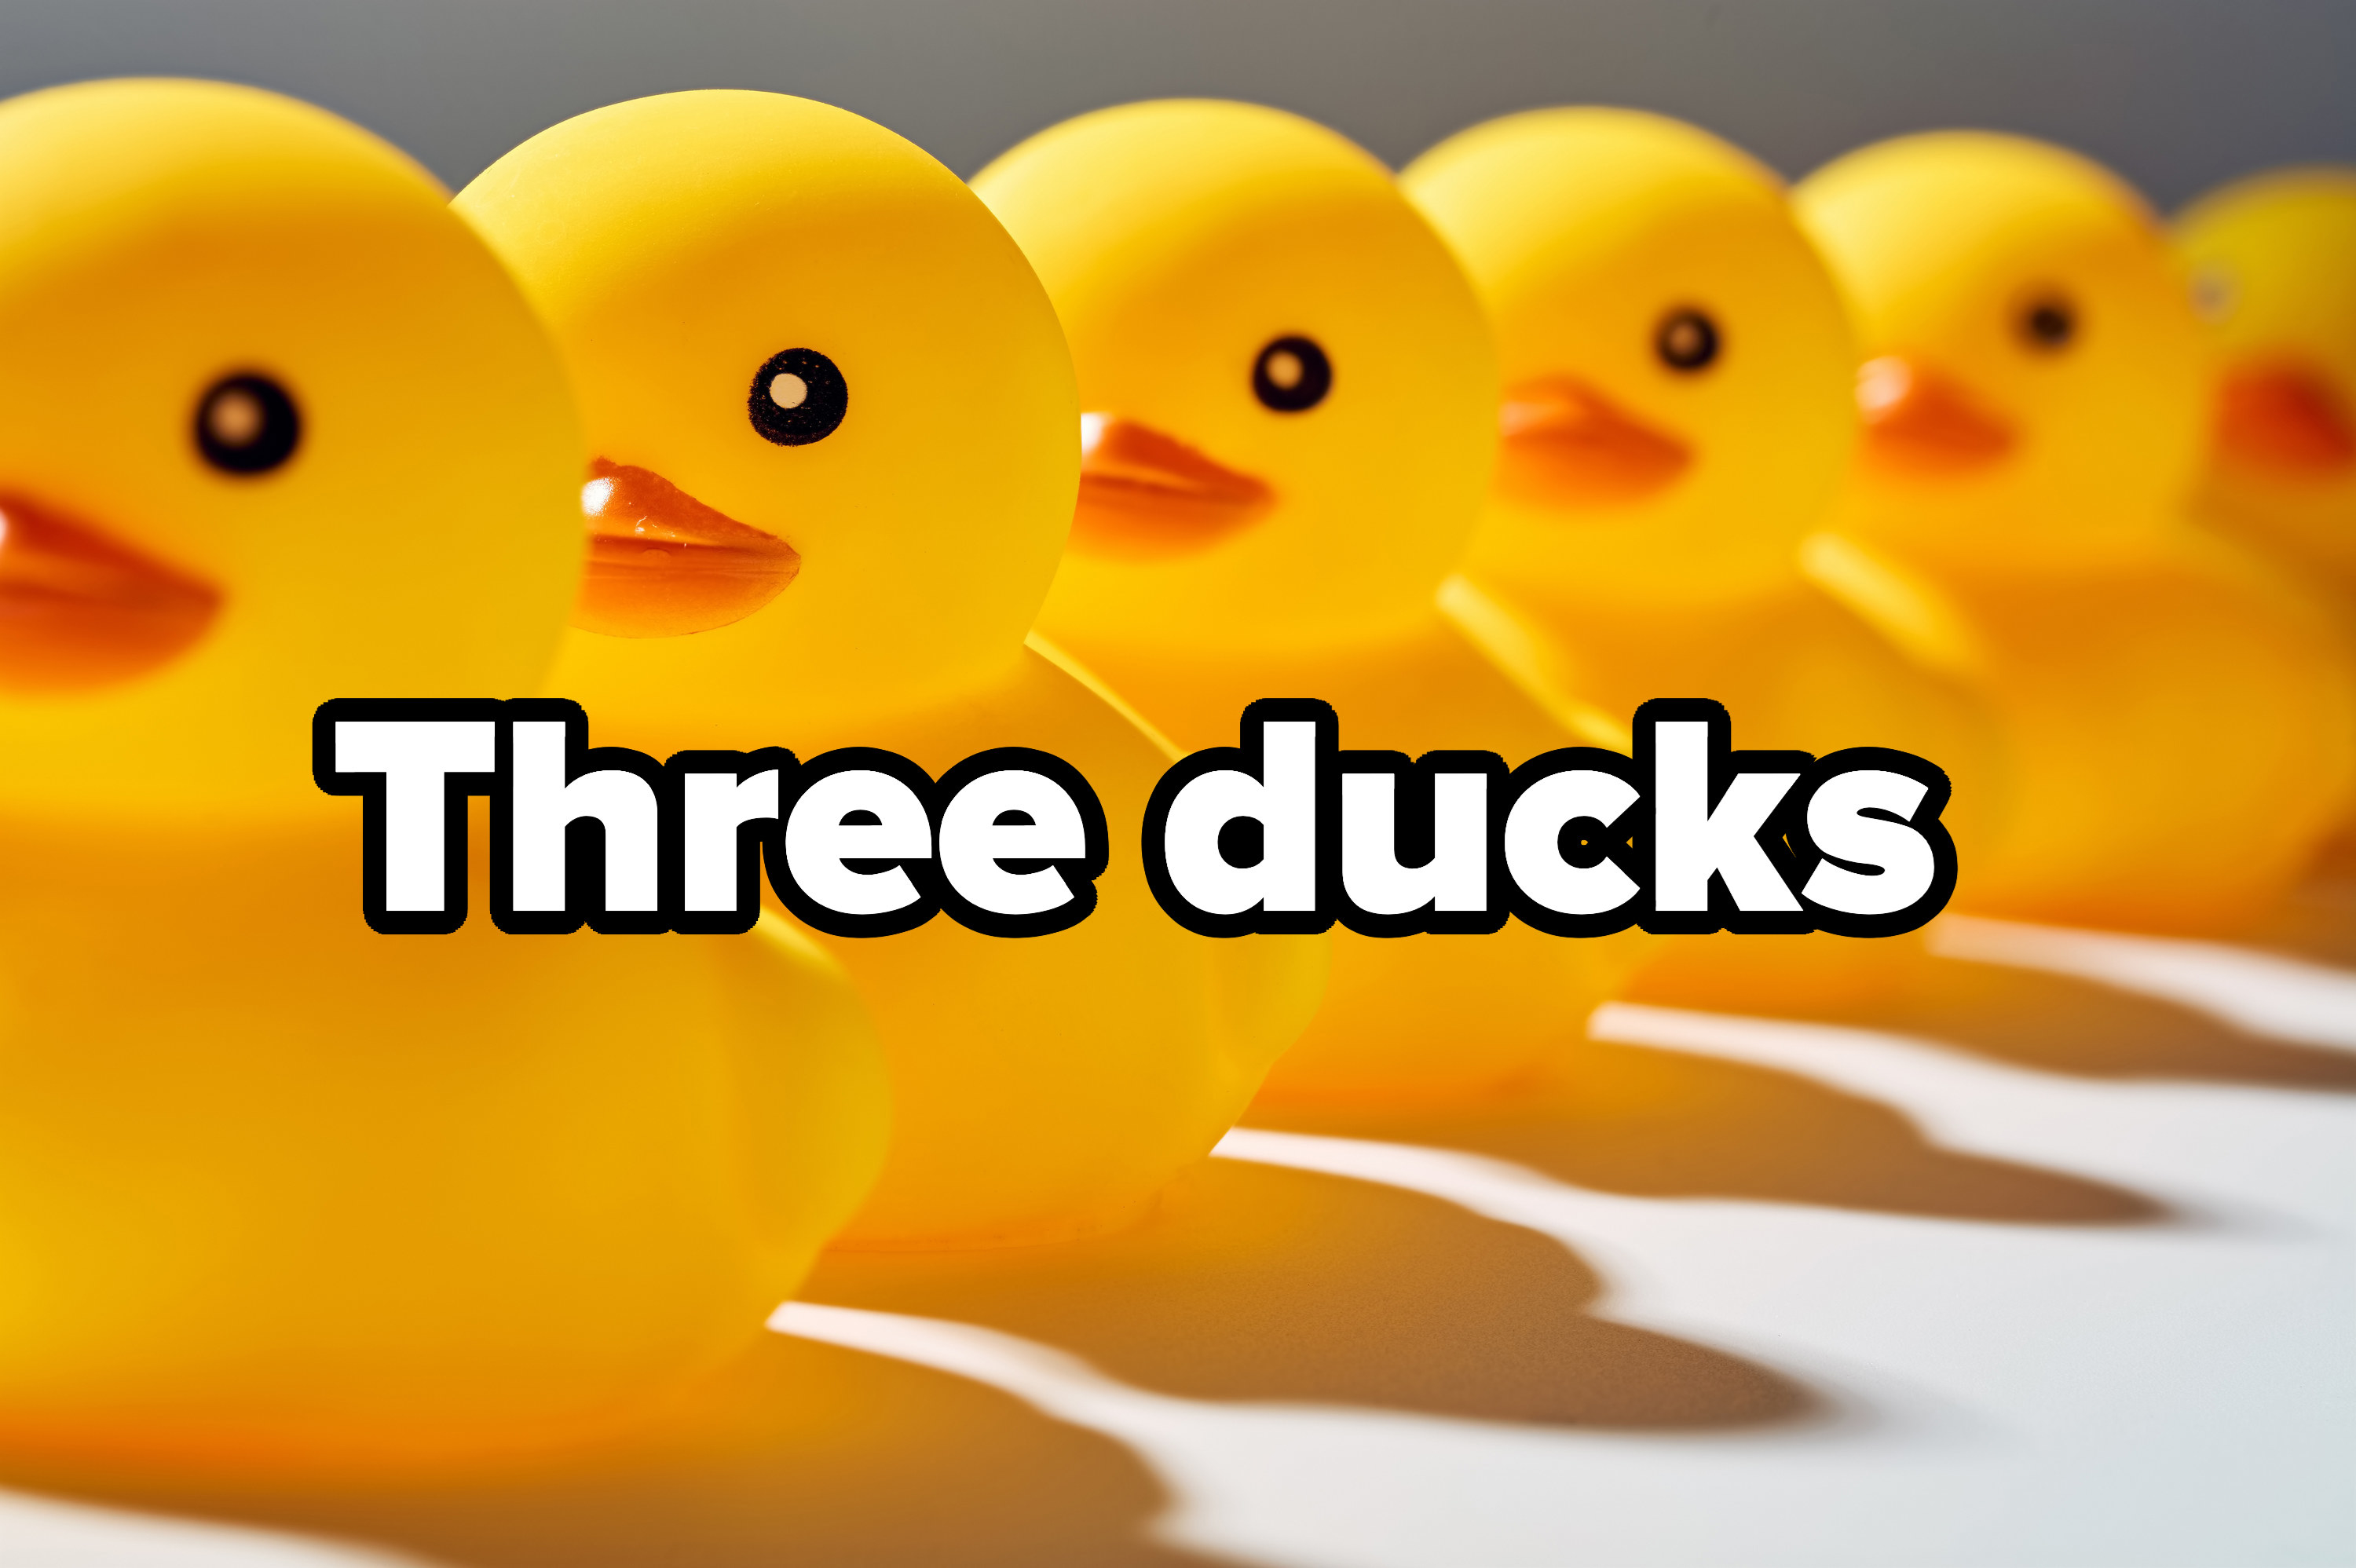 Rubber ducks in a row over text reading &quot;Three ducks&quot;